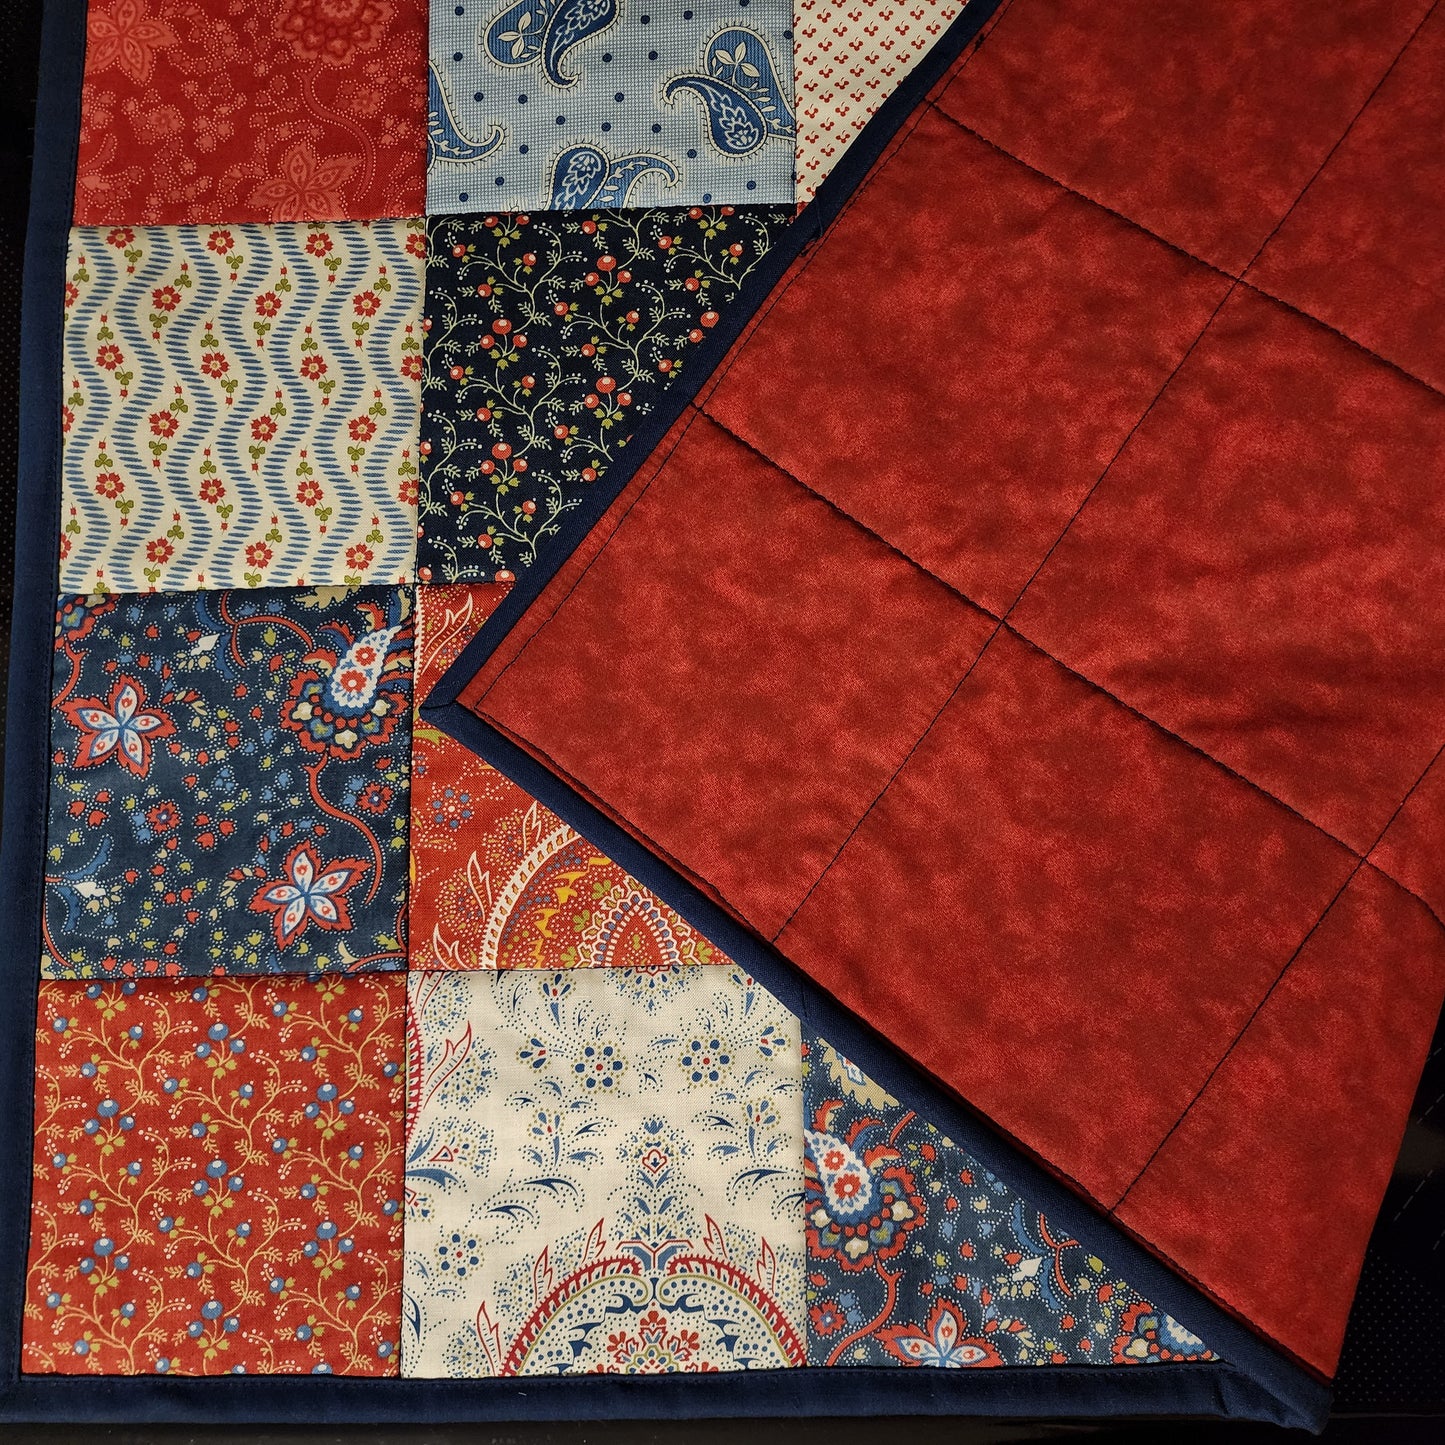 Large Insulated Quilted Glass top Range Cover Table Mat in Red, Blue, Cream